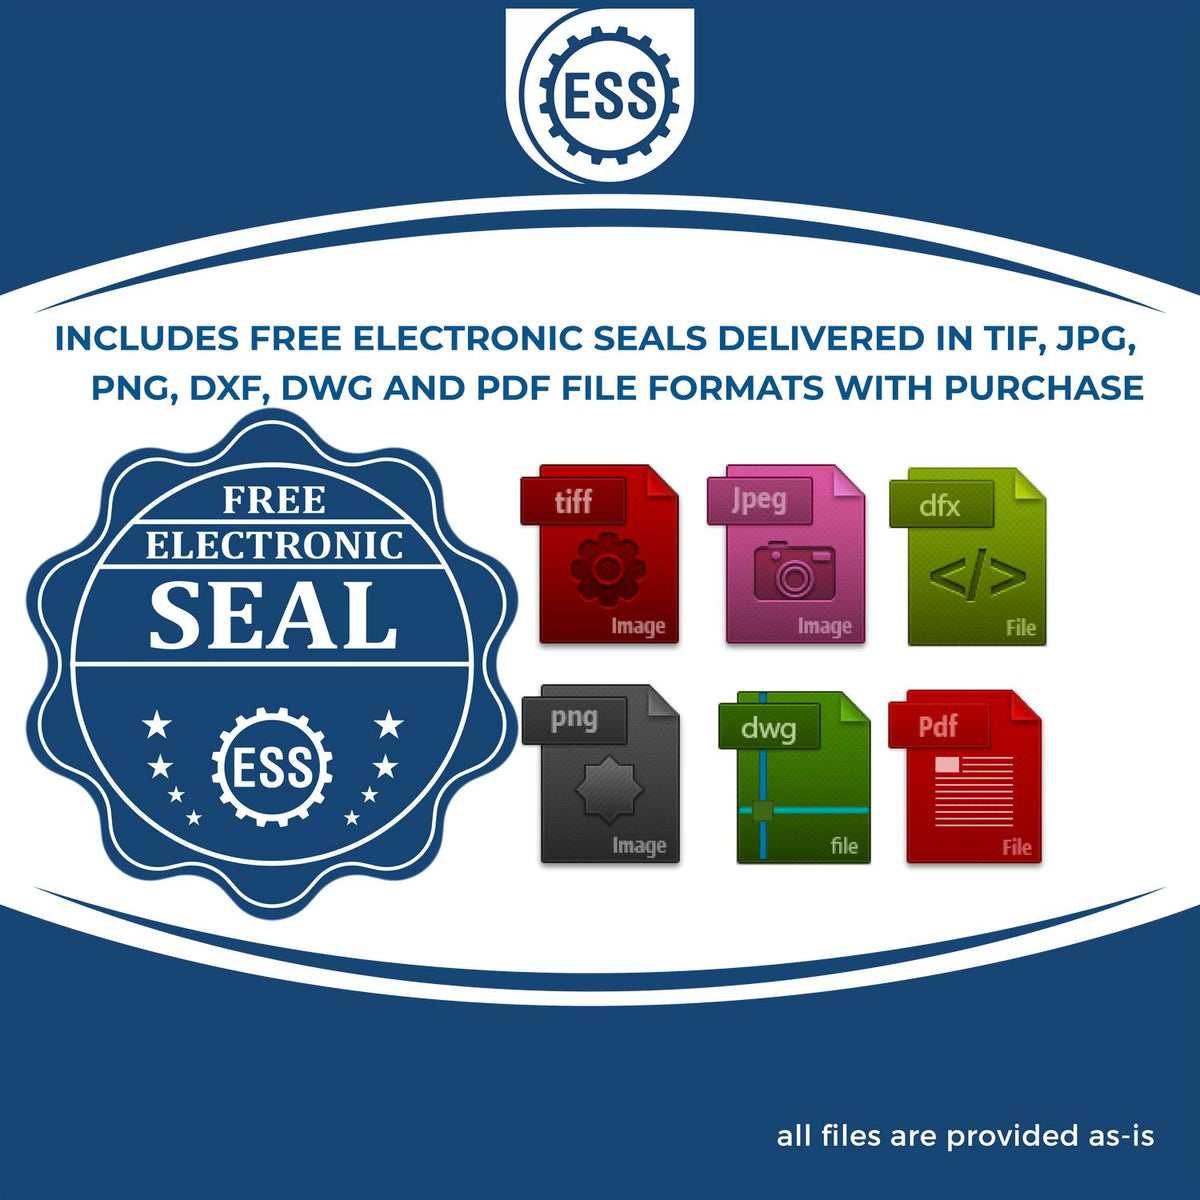 An infographic for the free electronic seal for the Slim Pre-Inked New Jersey Landscape Architect Seal Stamp illustrating the different file type icons such as DXF, DWG, TIF, JPG and PNG.